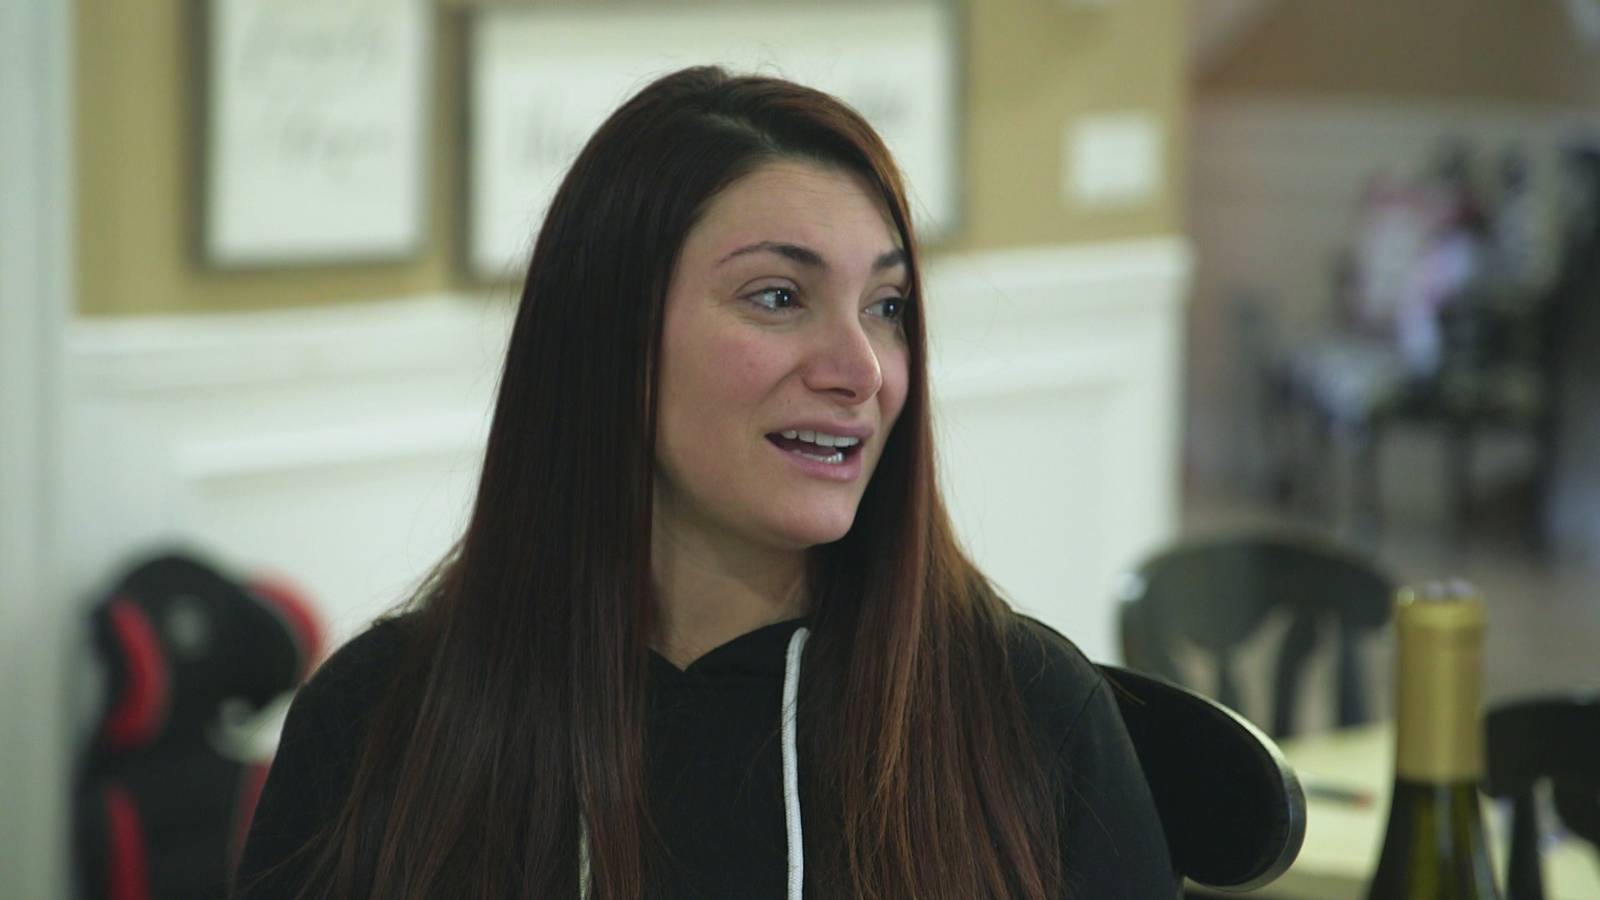 Reality TV star Deena Cortese in an episode of 'Jersey Shore: Family Vacation'